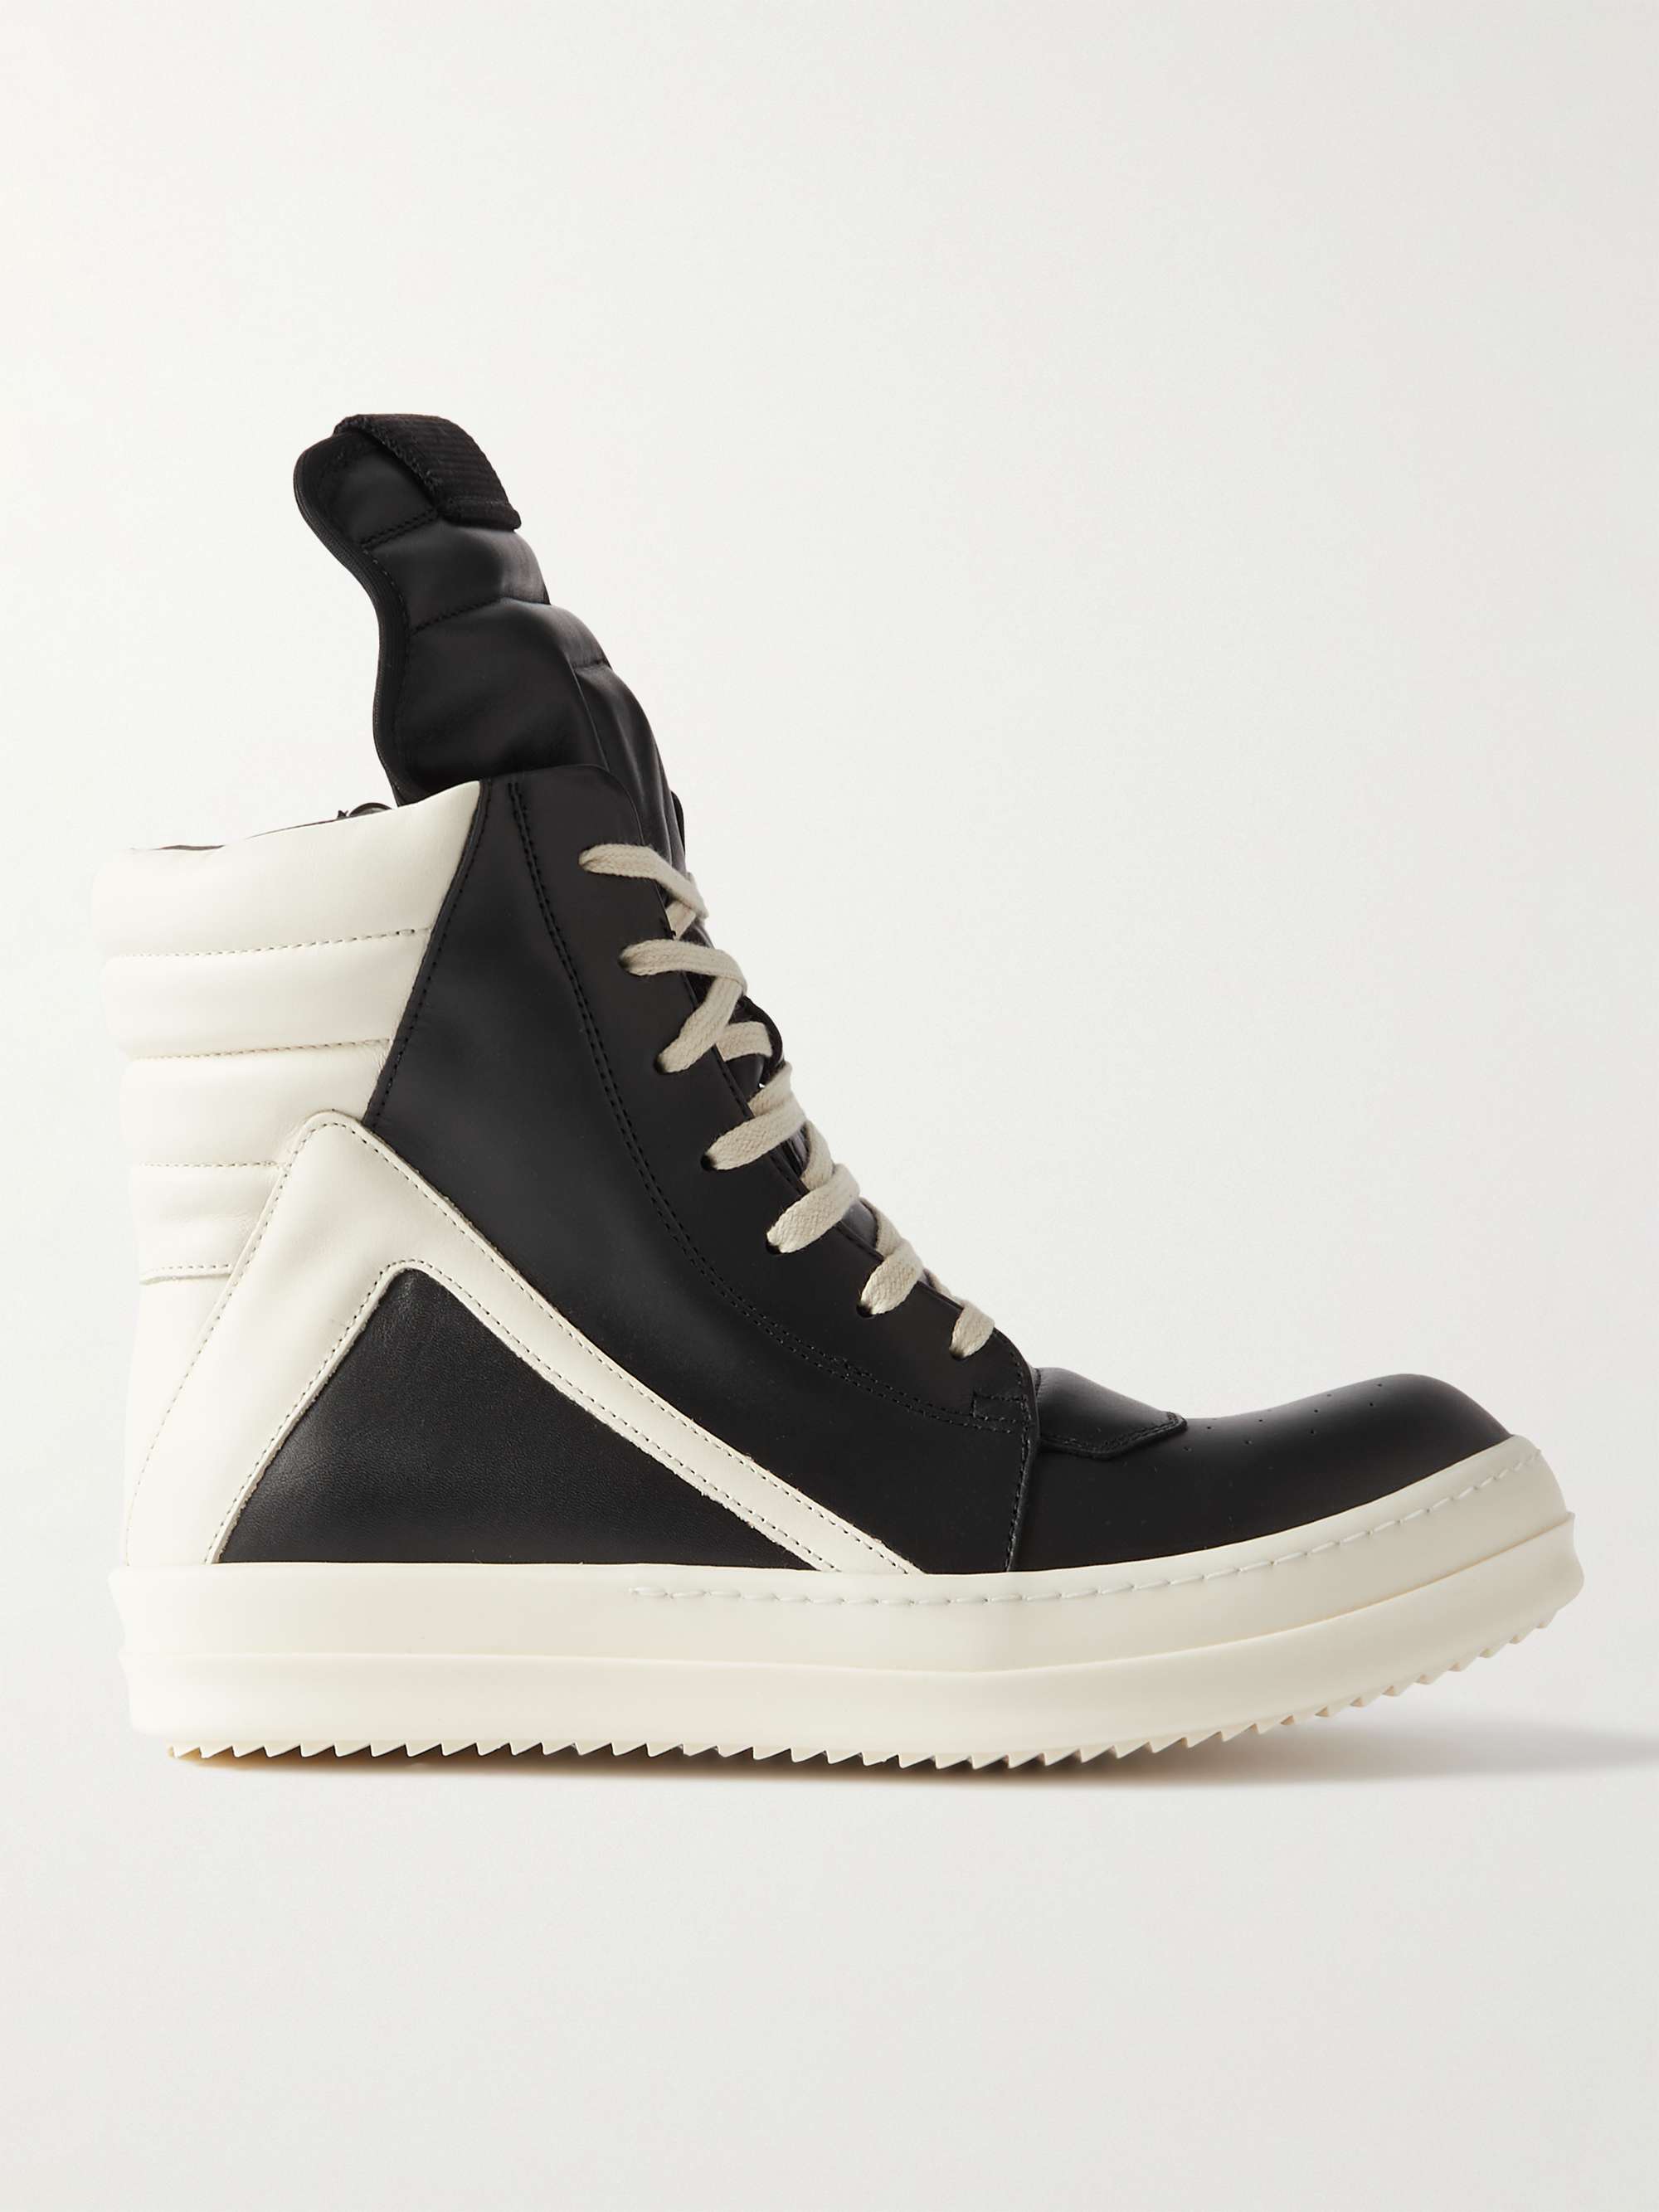 RICK OWENS Geobasket Two-Tone Leather High-Top Sneakers for Men | MR PORTER